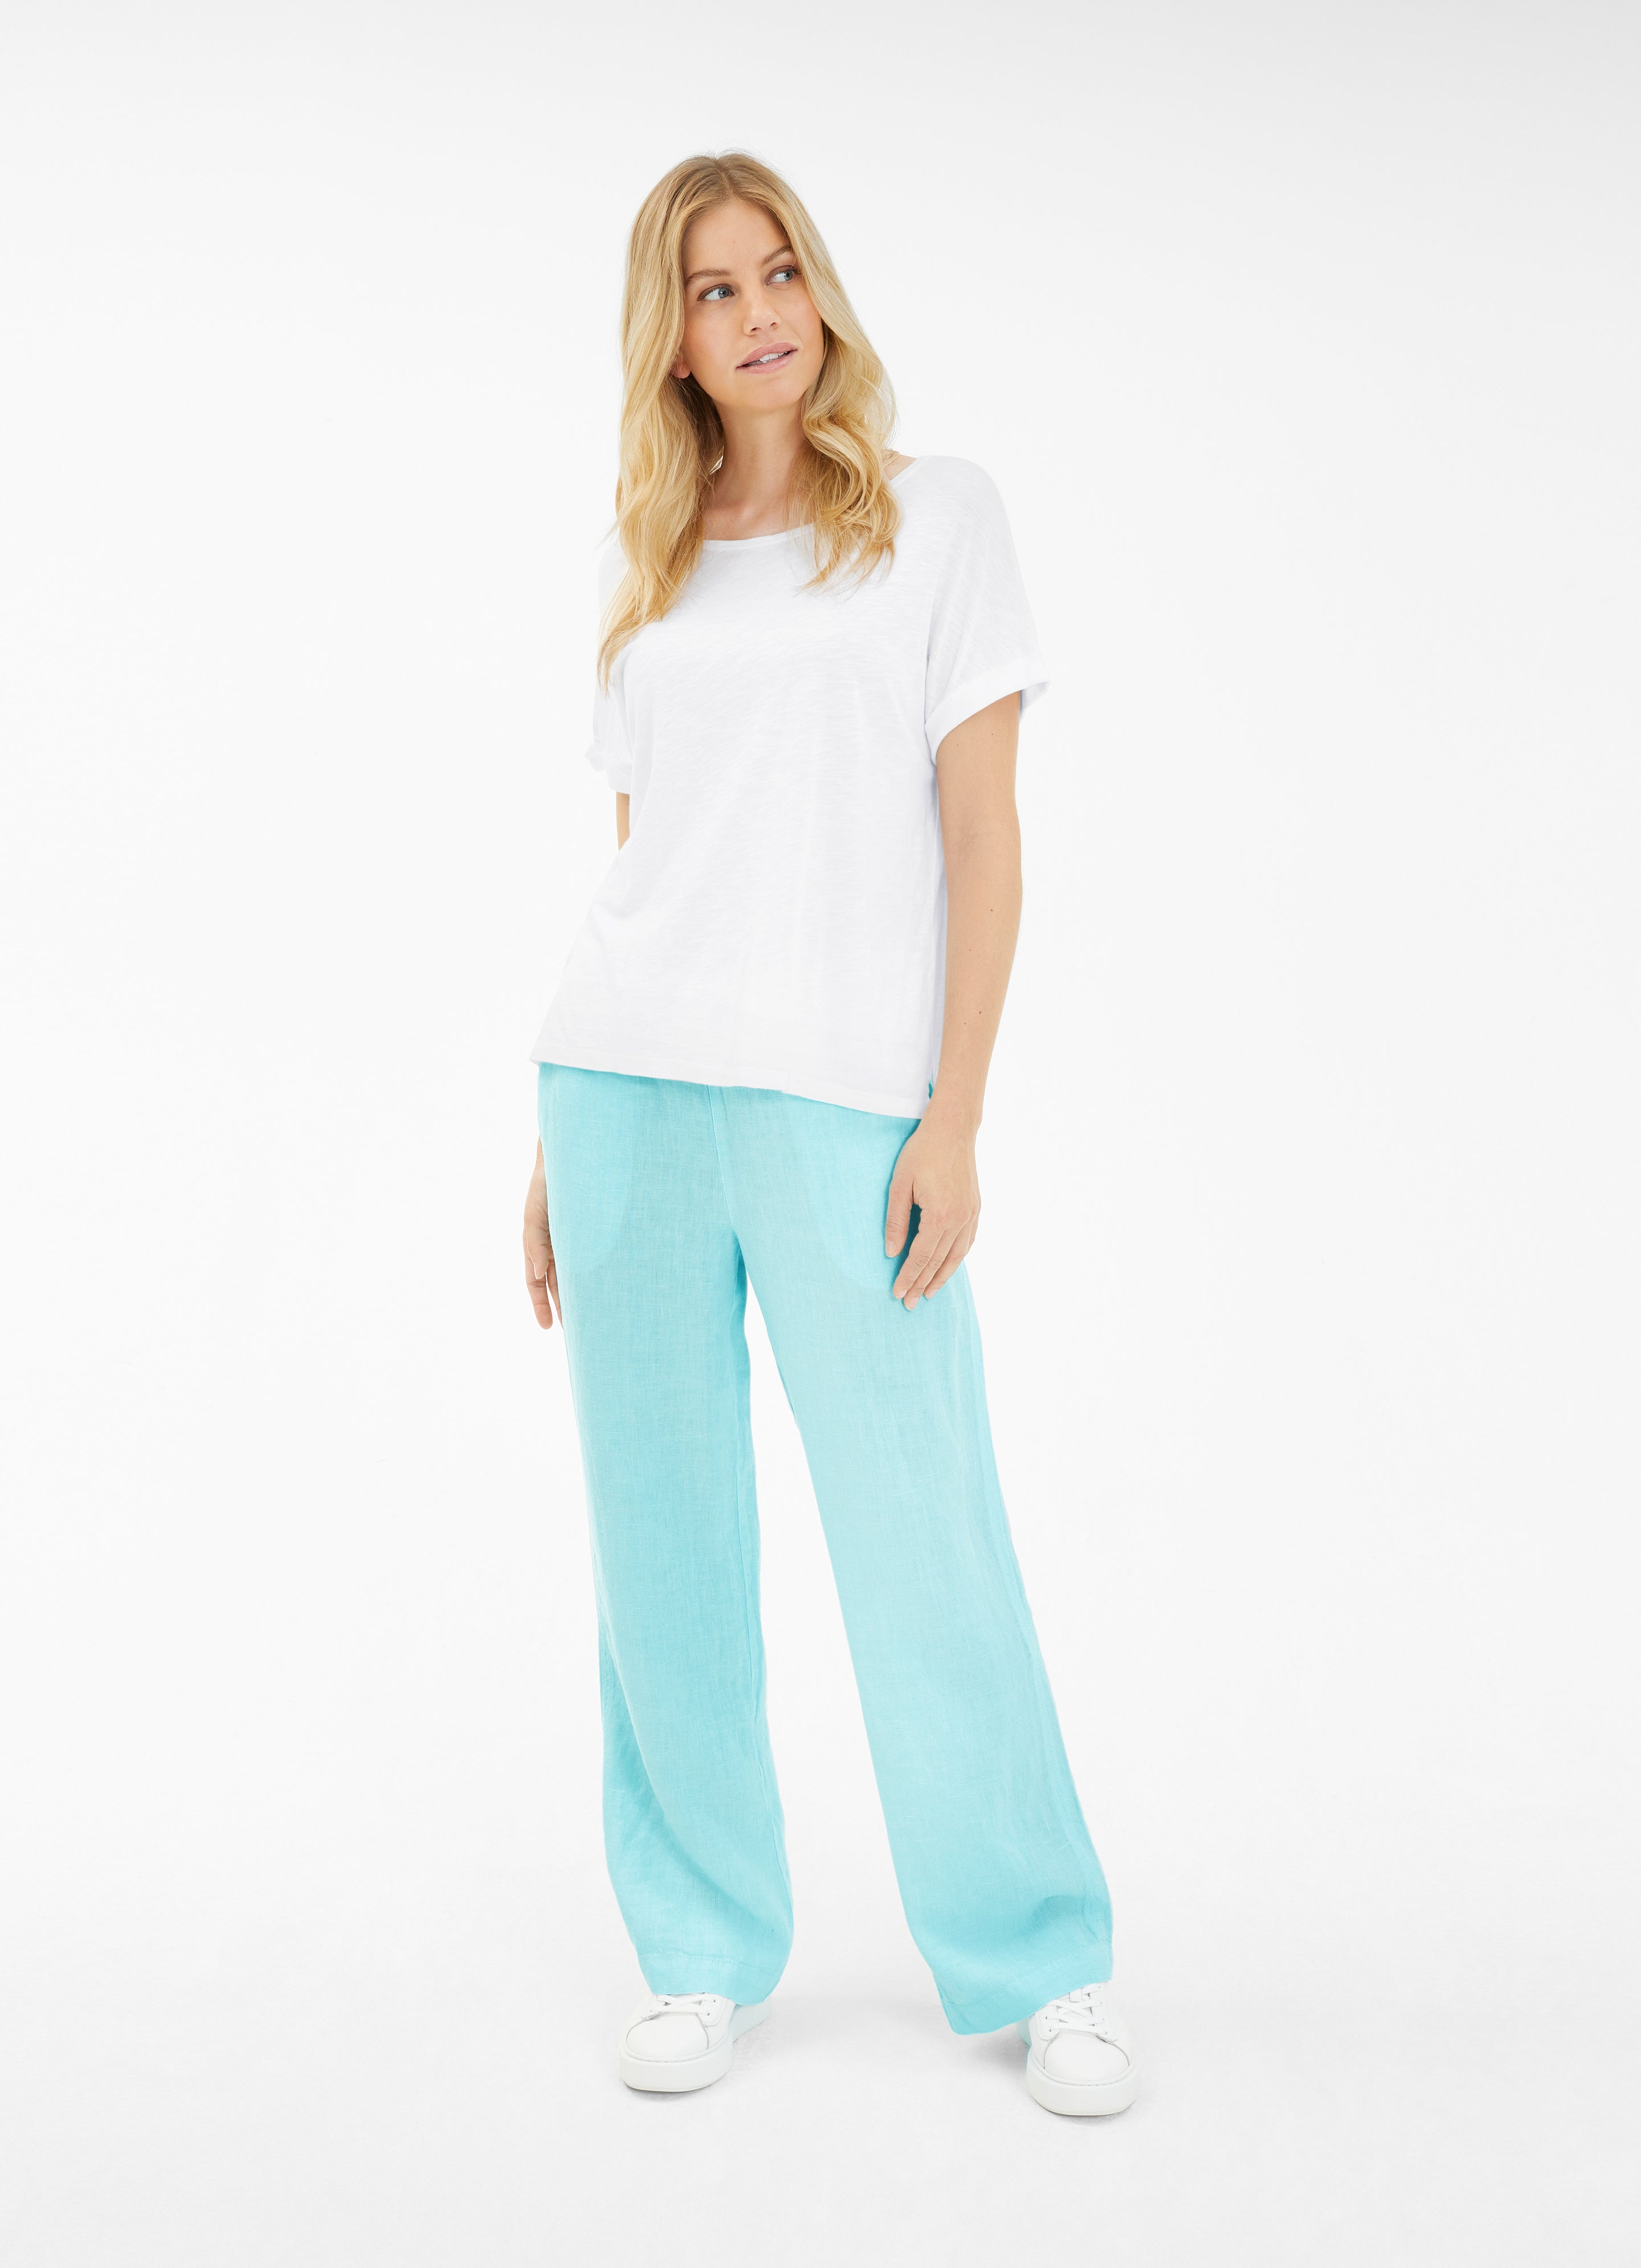 Washed Linen Trousers Wide Leg